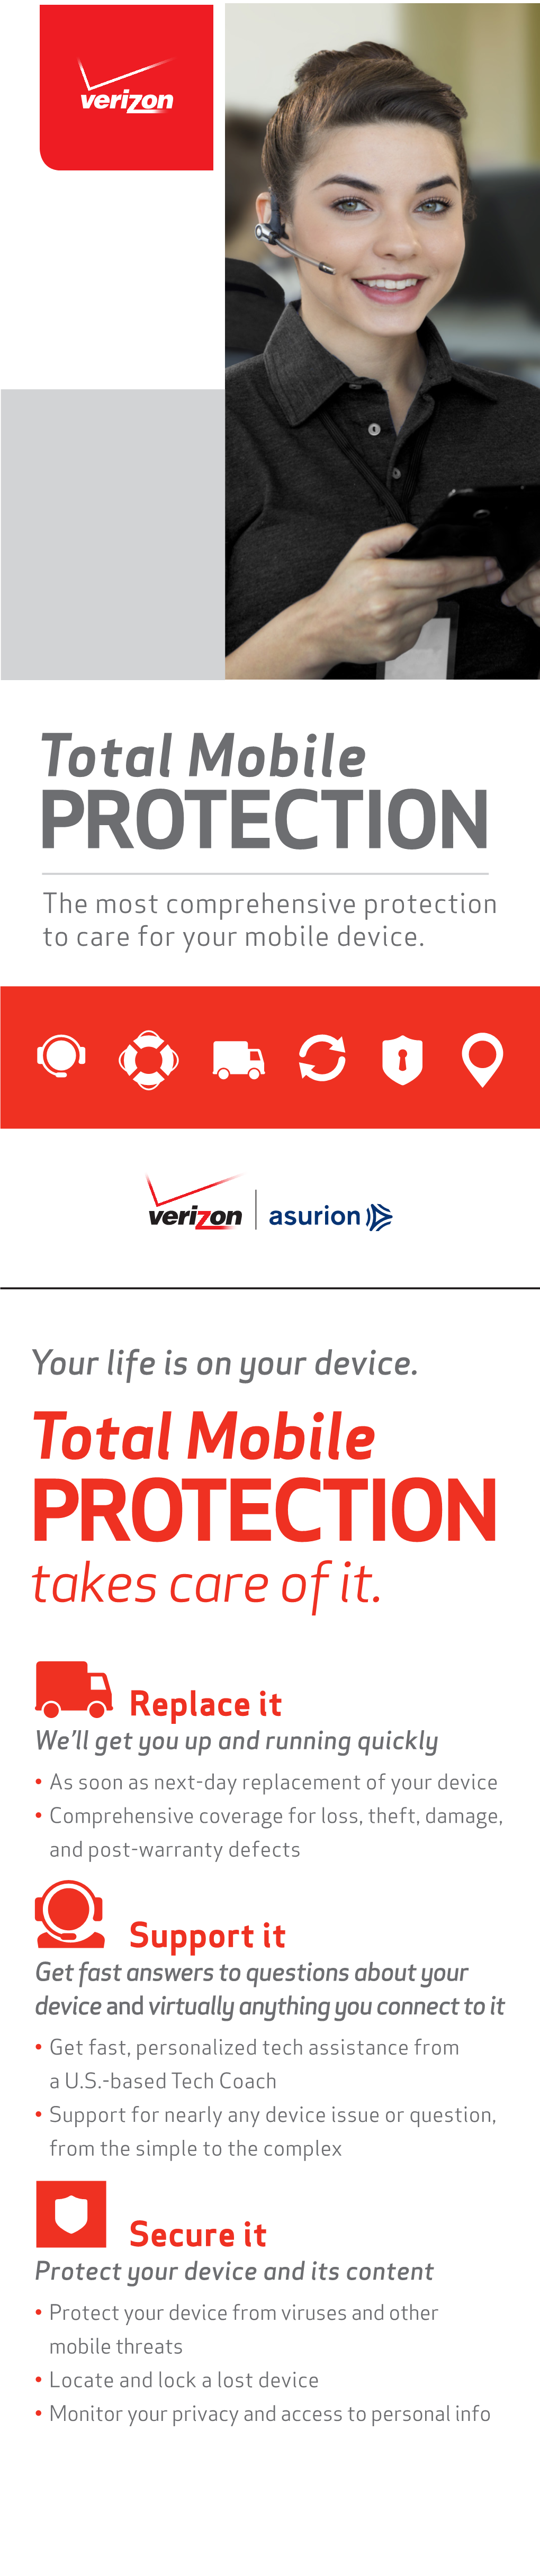 PROTECTION the Most Comprehensive Protection to Care for Your Mobile Device